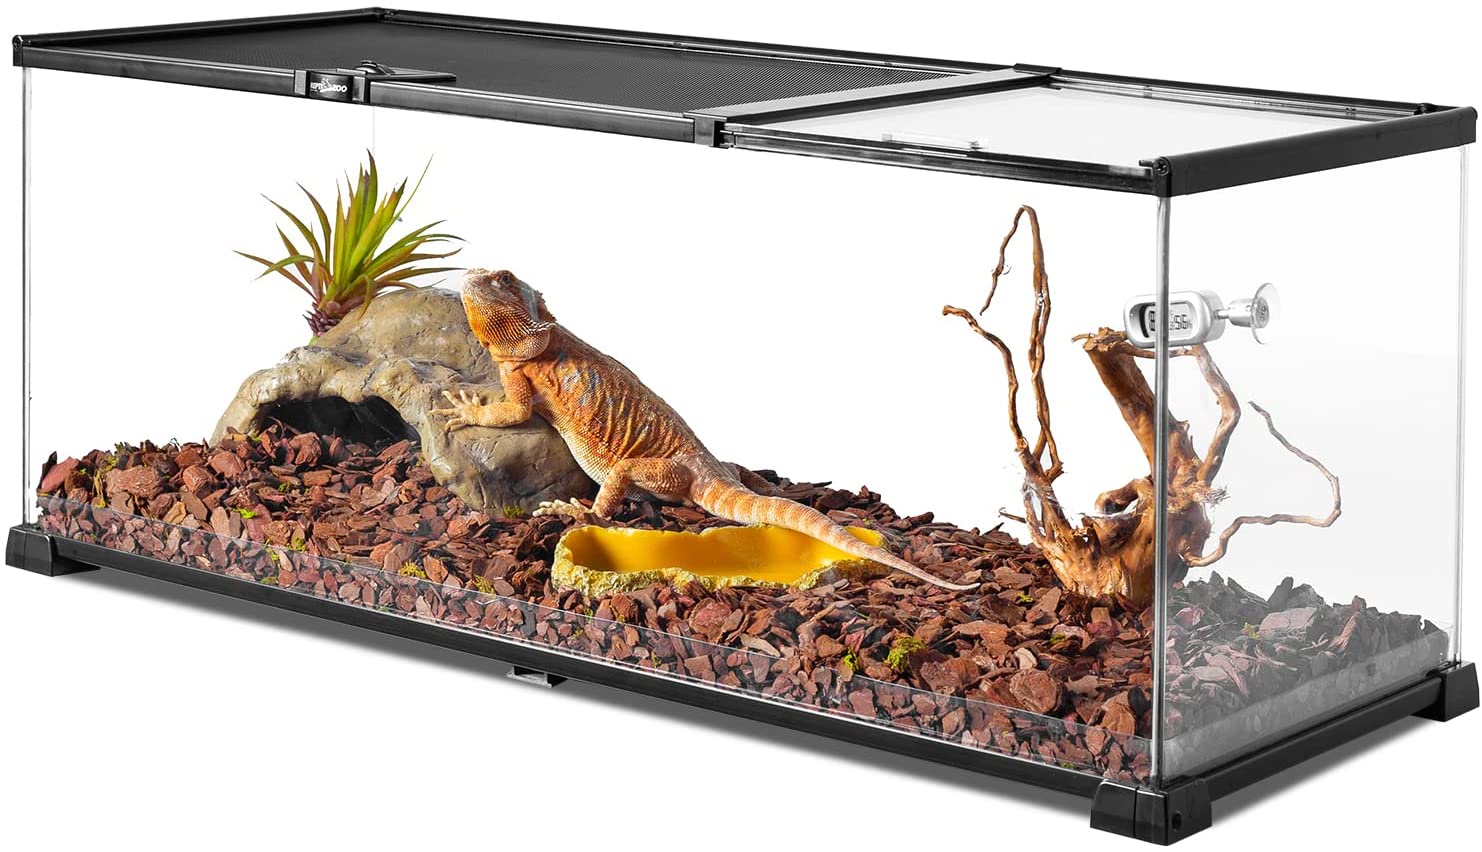 How big is 20 gallon reptile tank for baby leopard gecko?